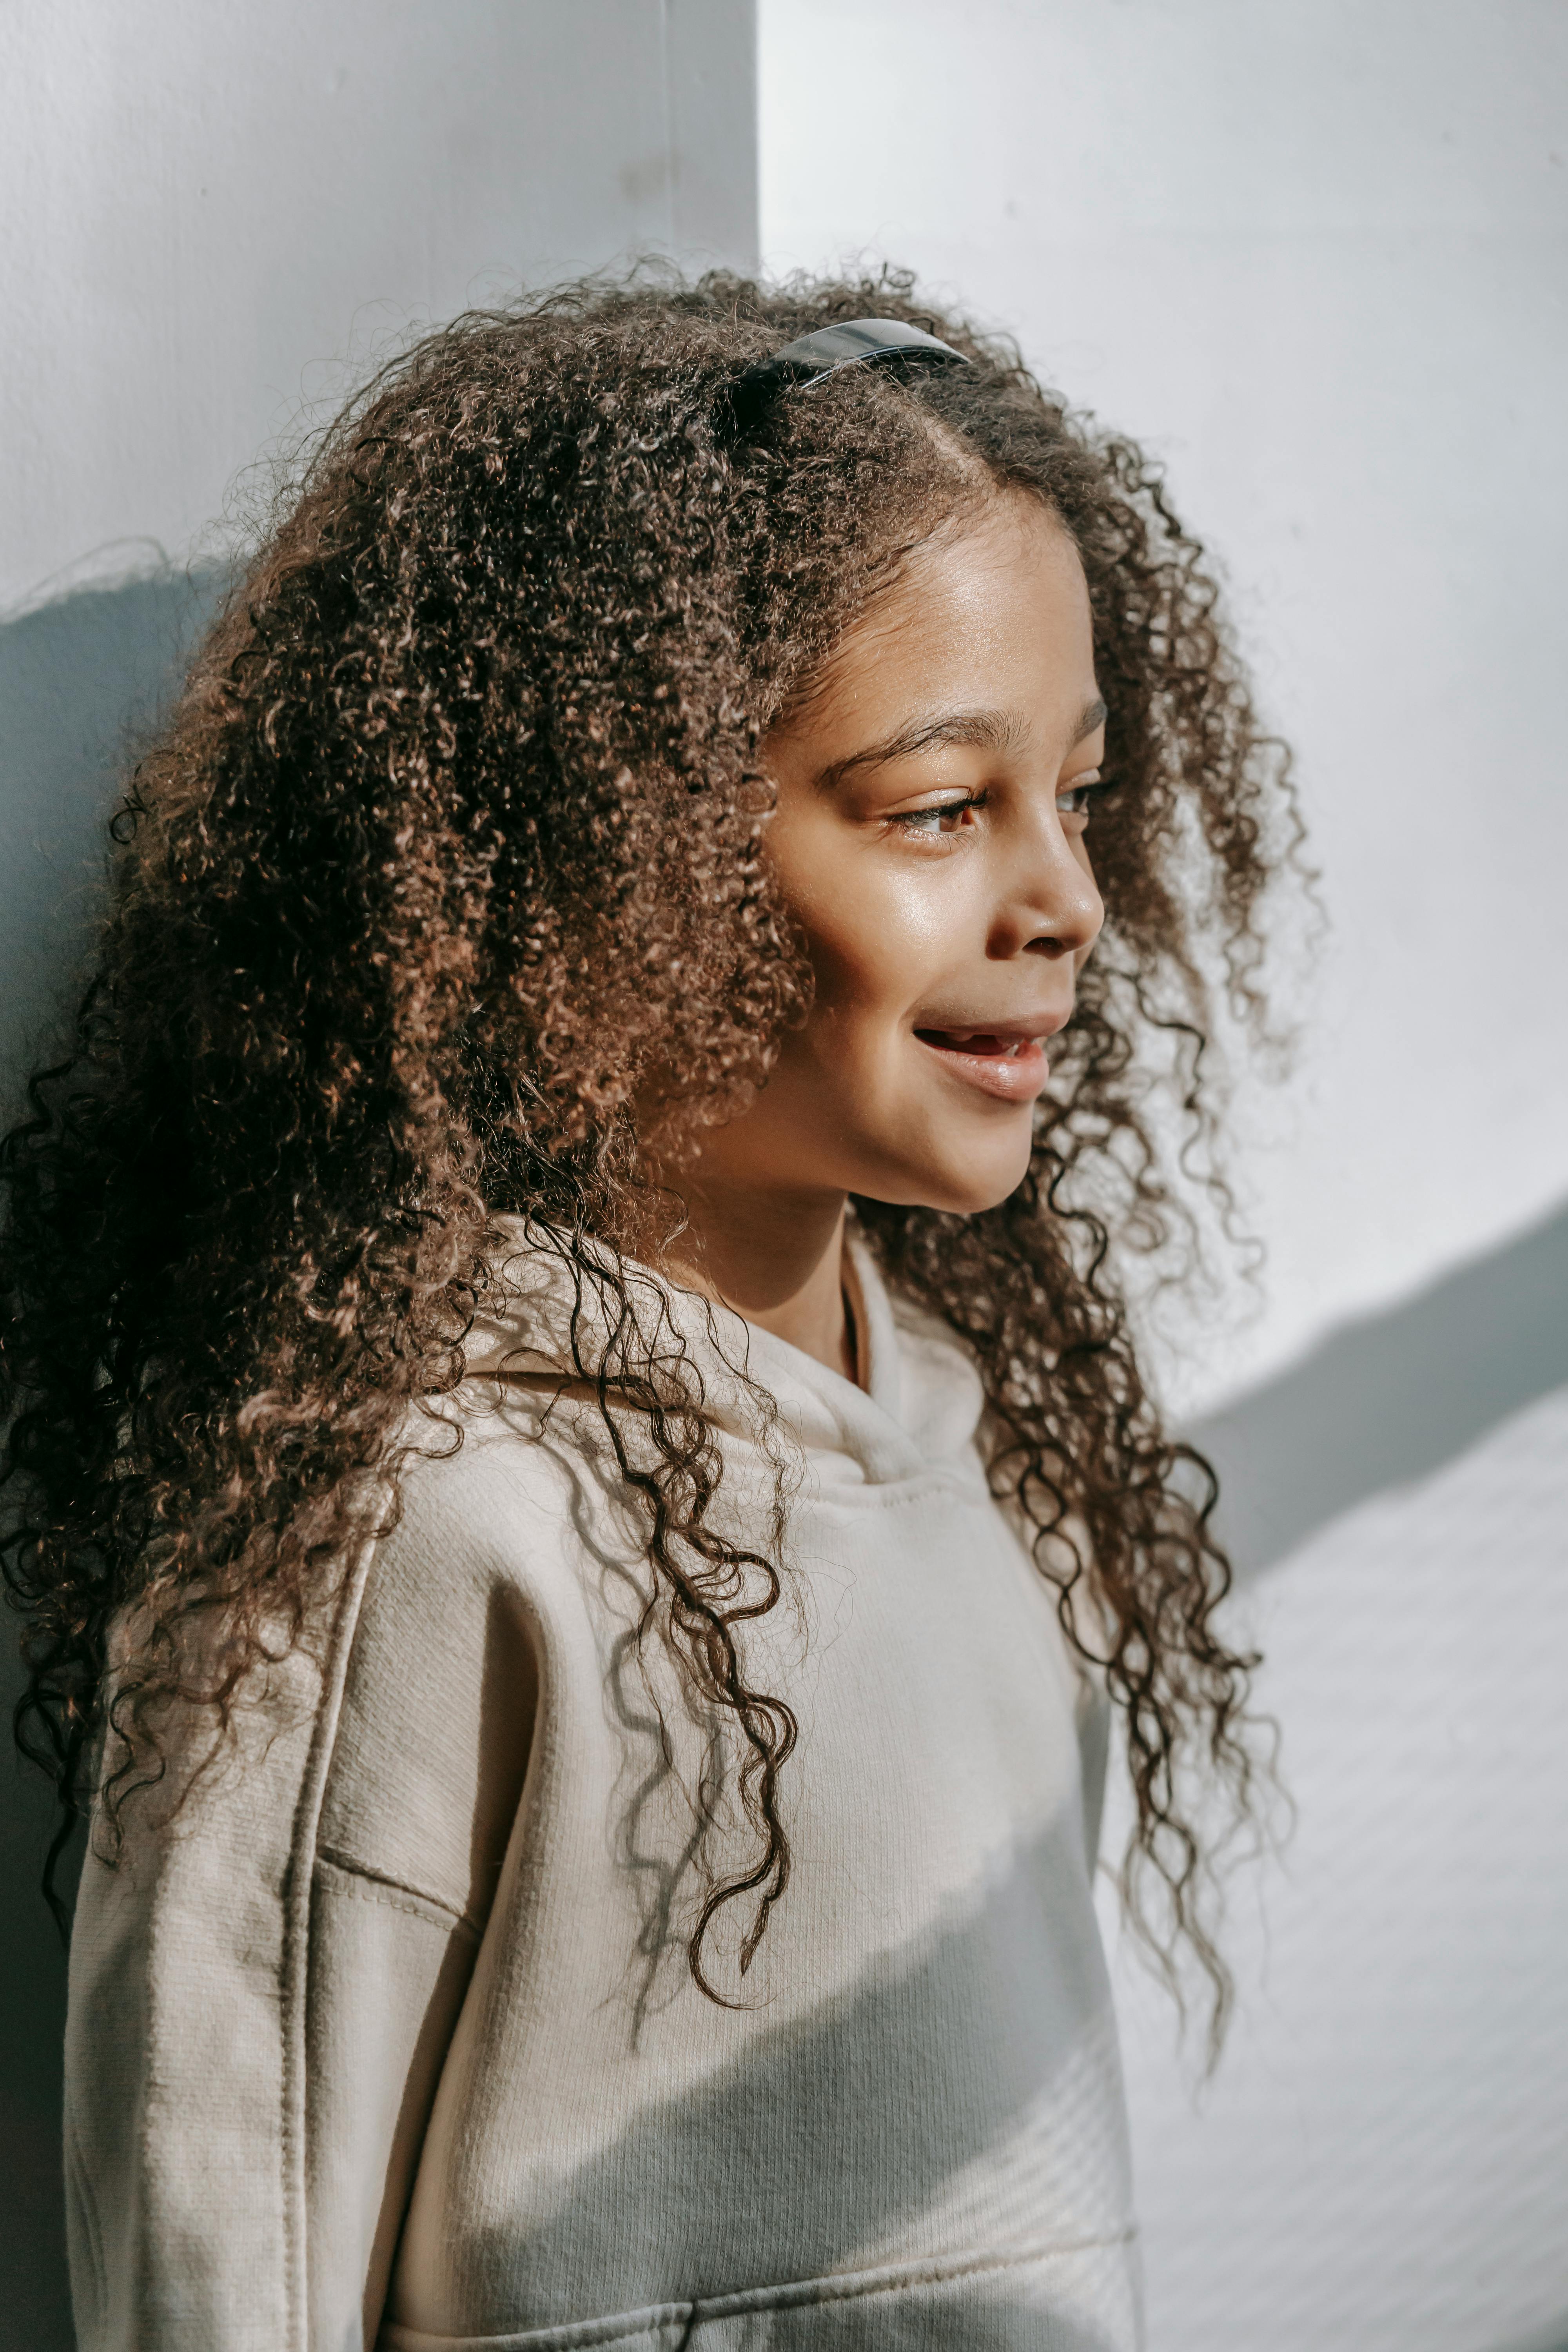 Cheerful black girl with long curly hair looking away against white wall ·  Free Stock Photo